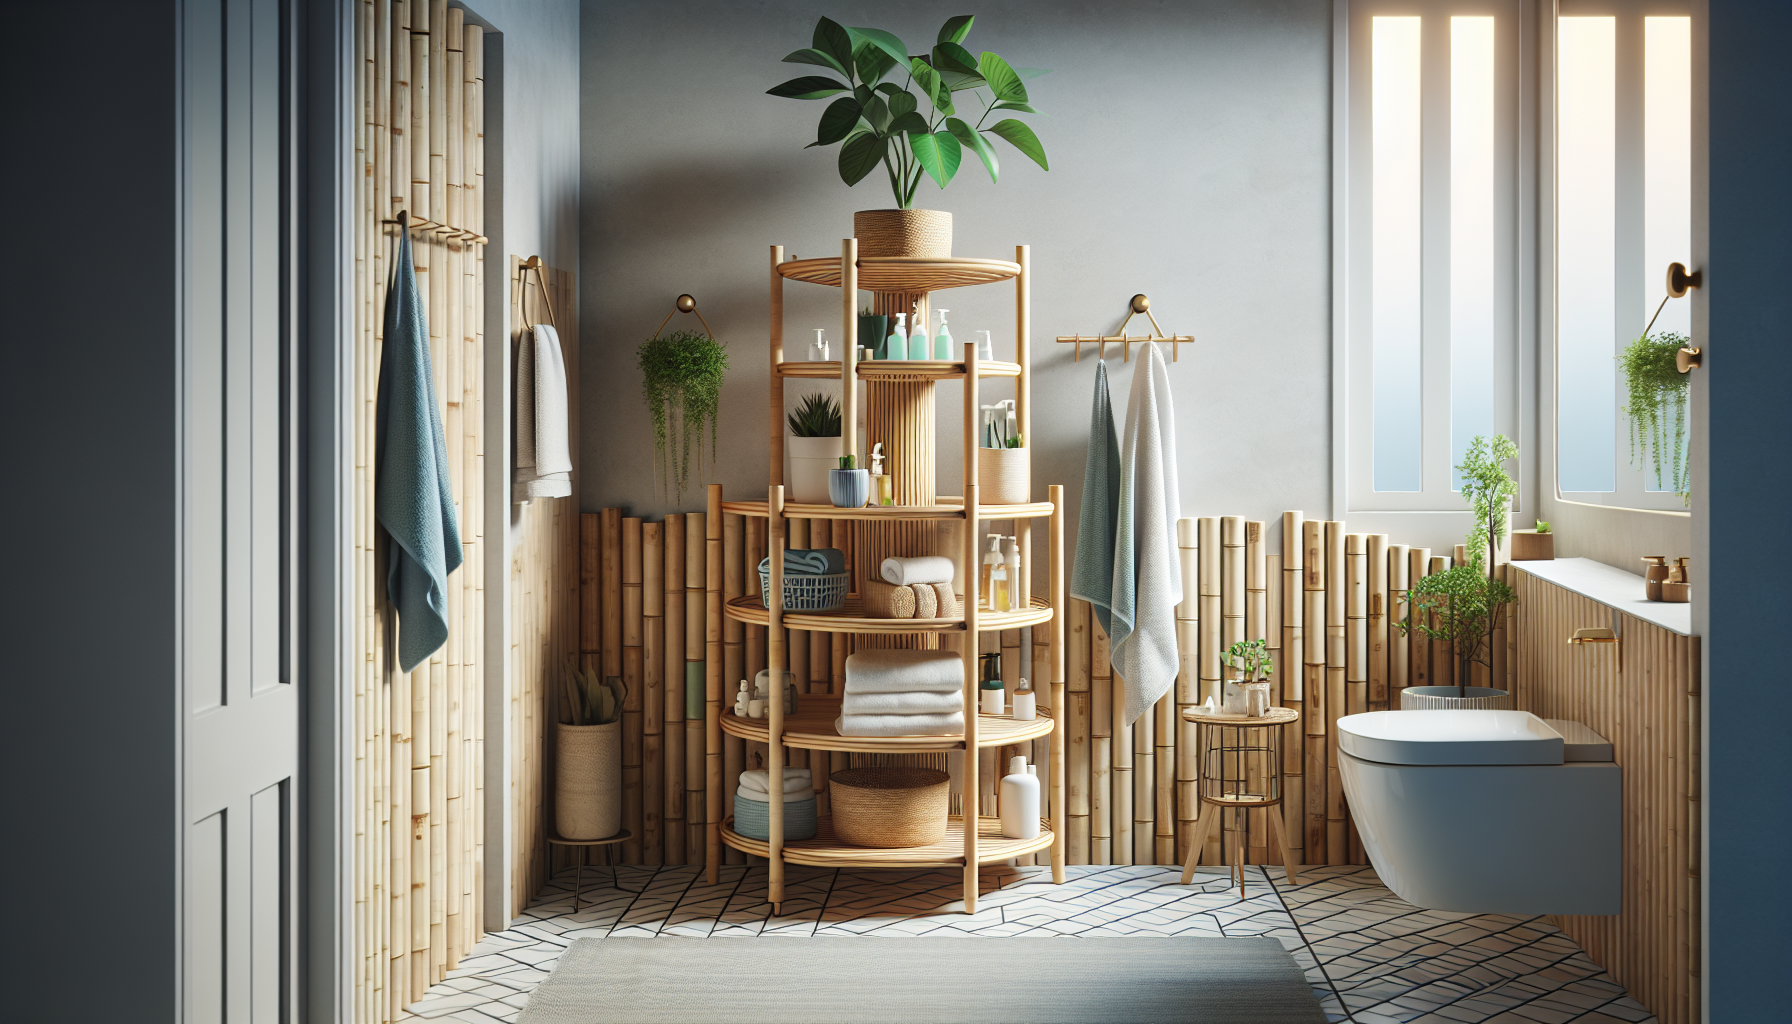 Revamp your bathroom storage with IKEA's Satsumas plant stand